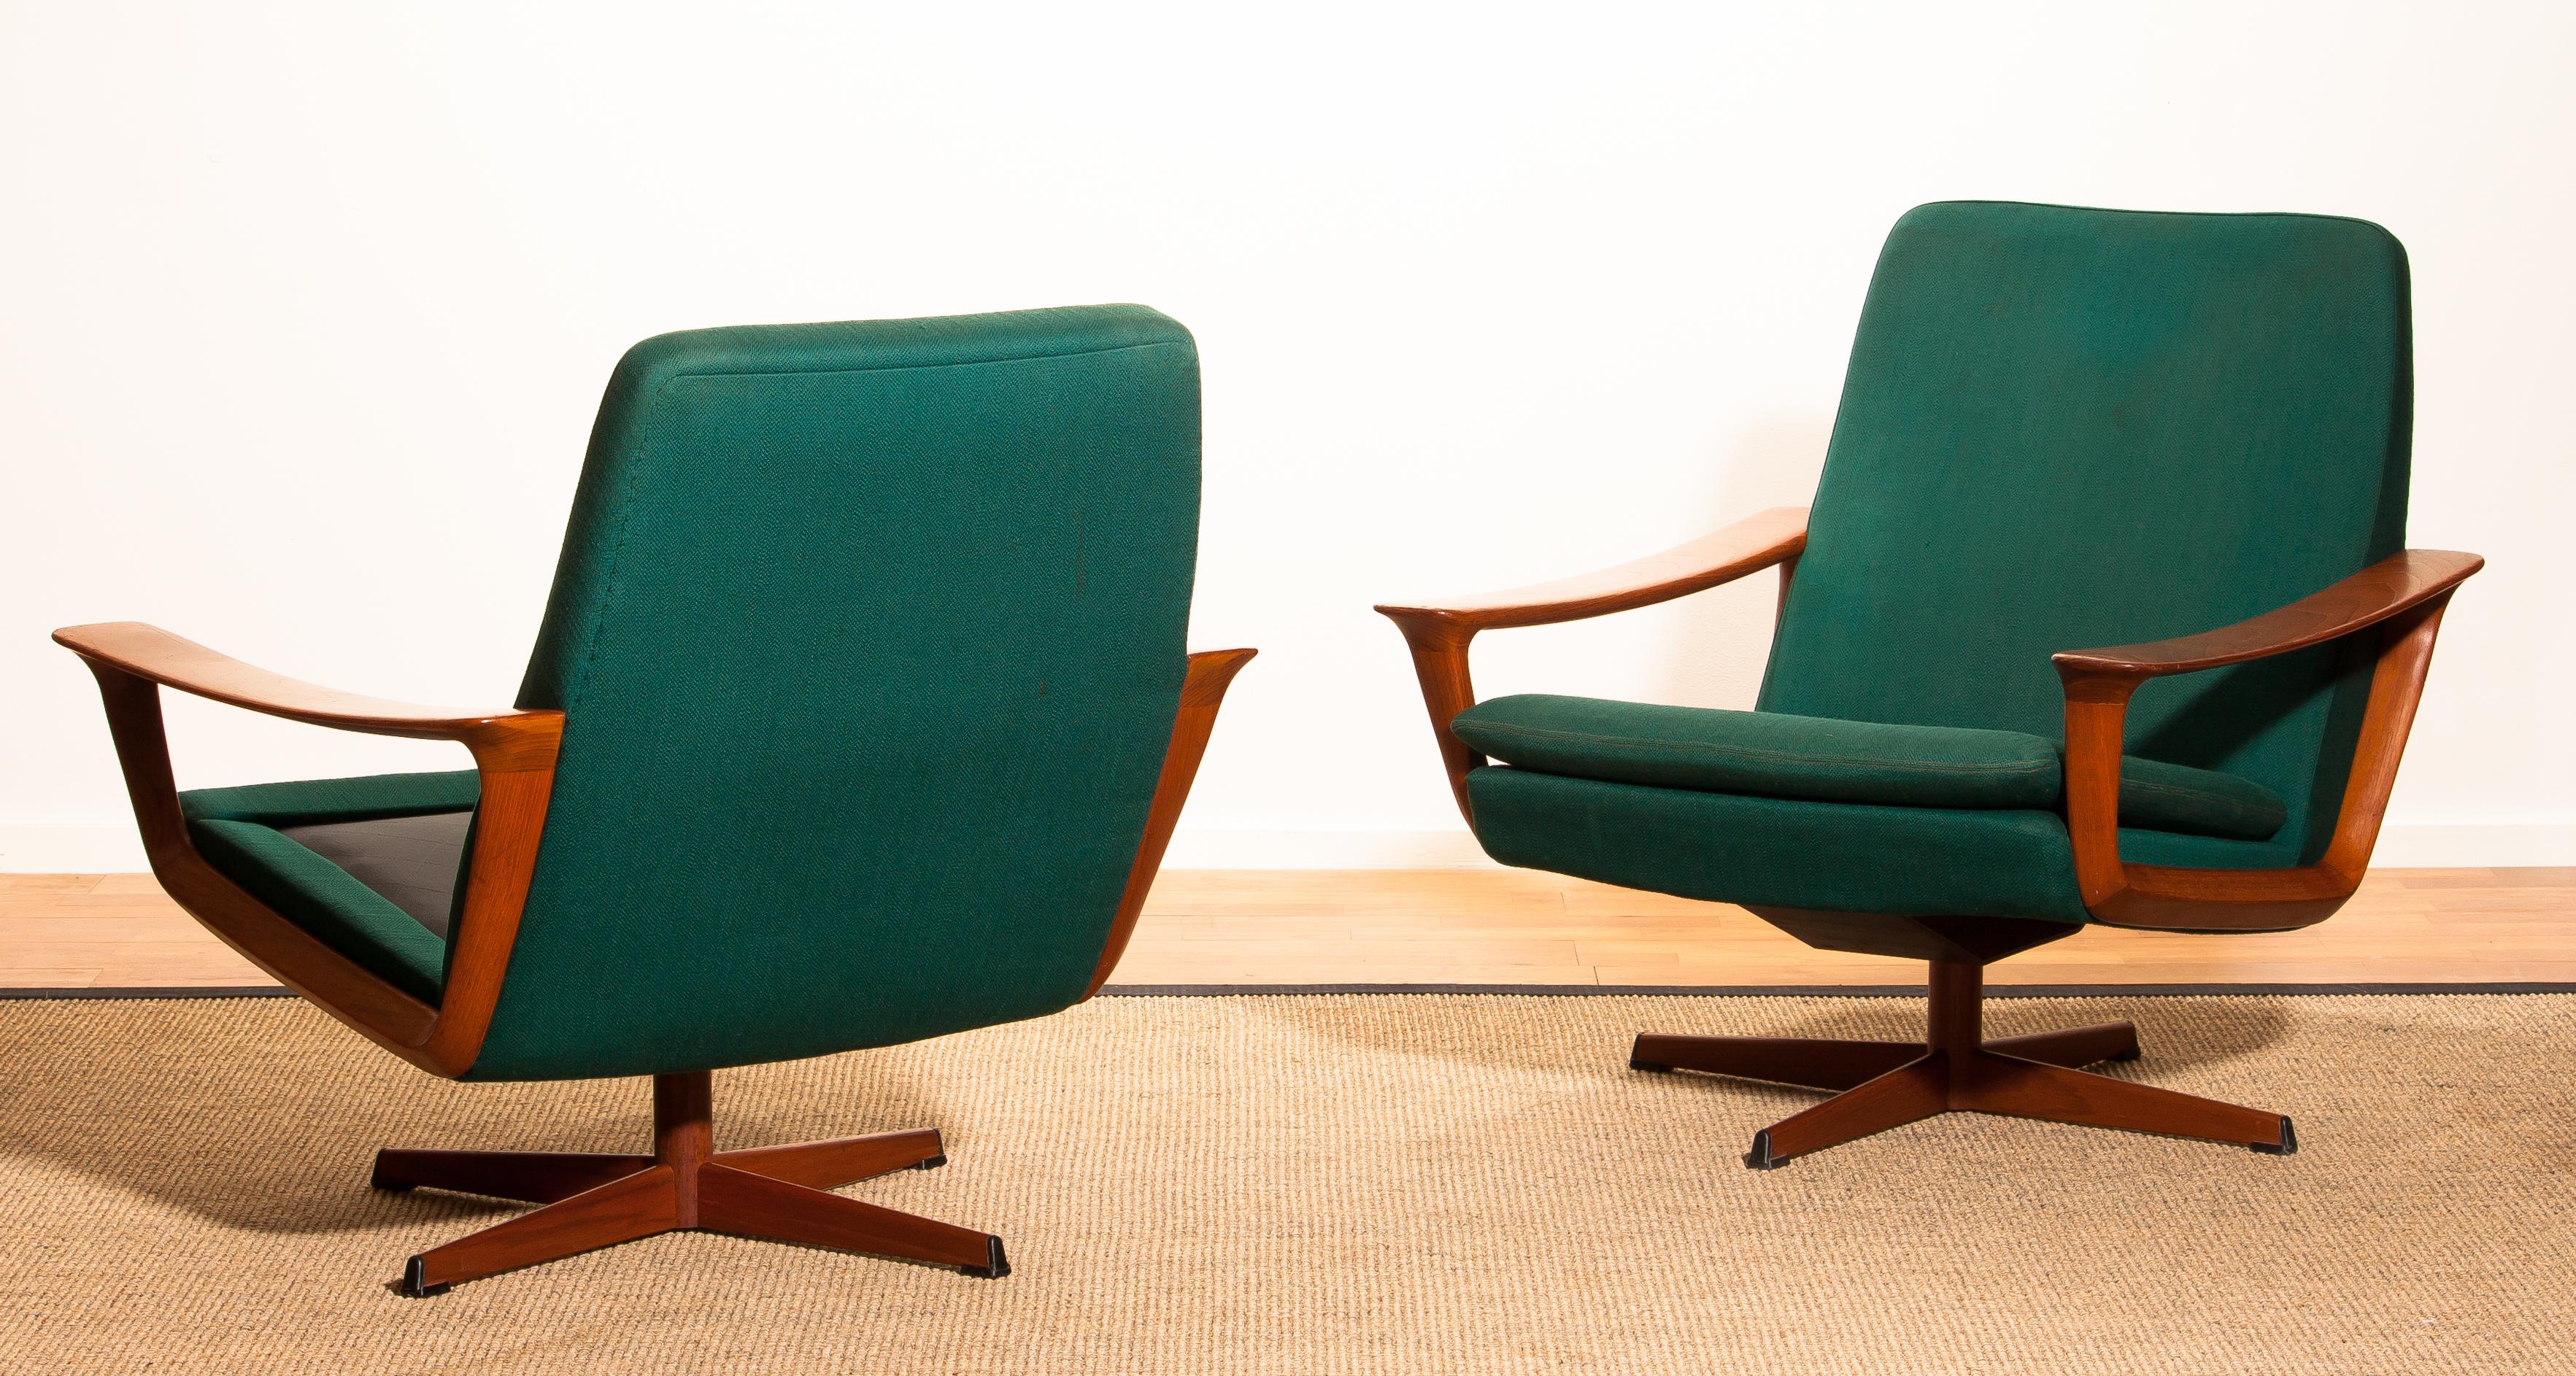 Danish 1960s, Teak Set of Two Swivel Chairs by Johannes Andersson for Trensum, Denmark